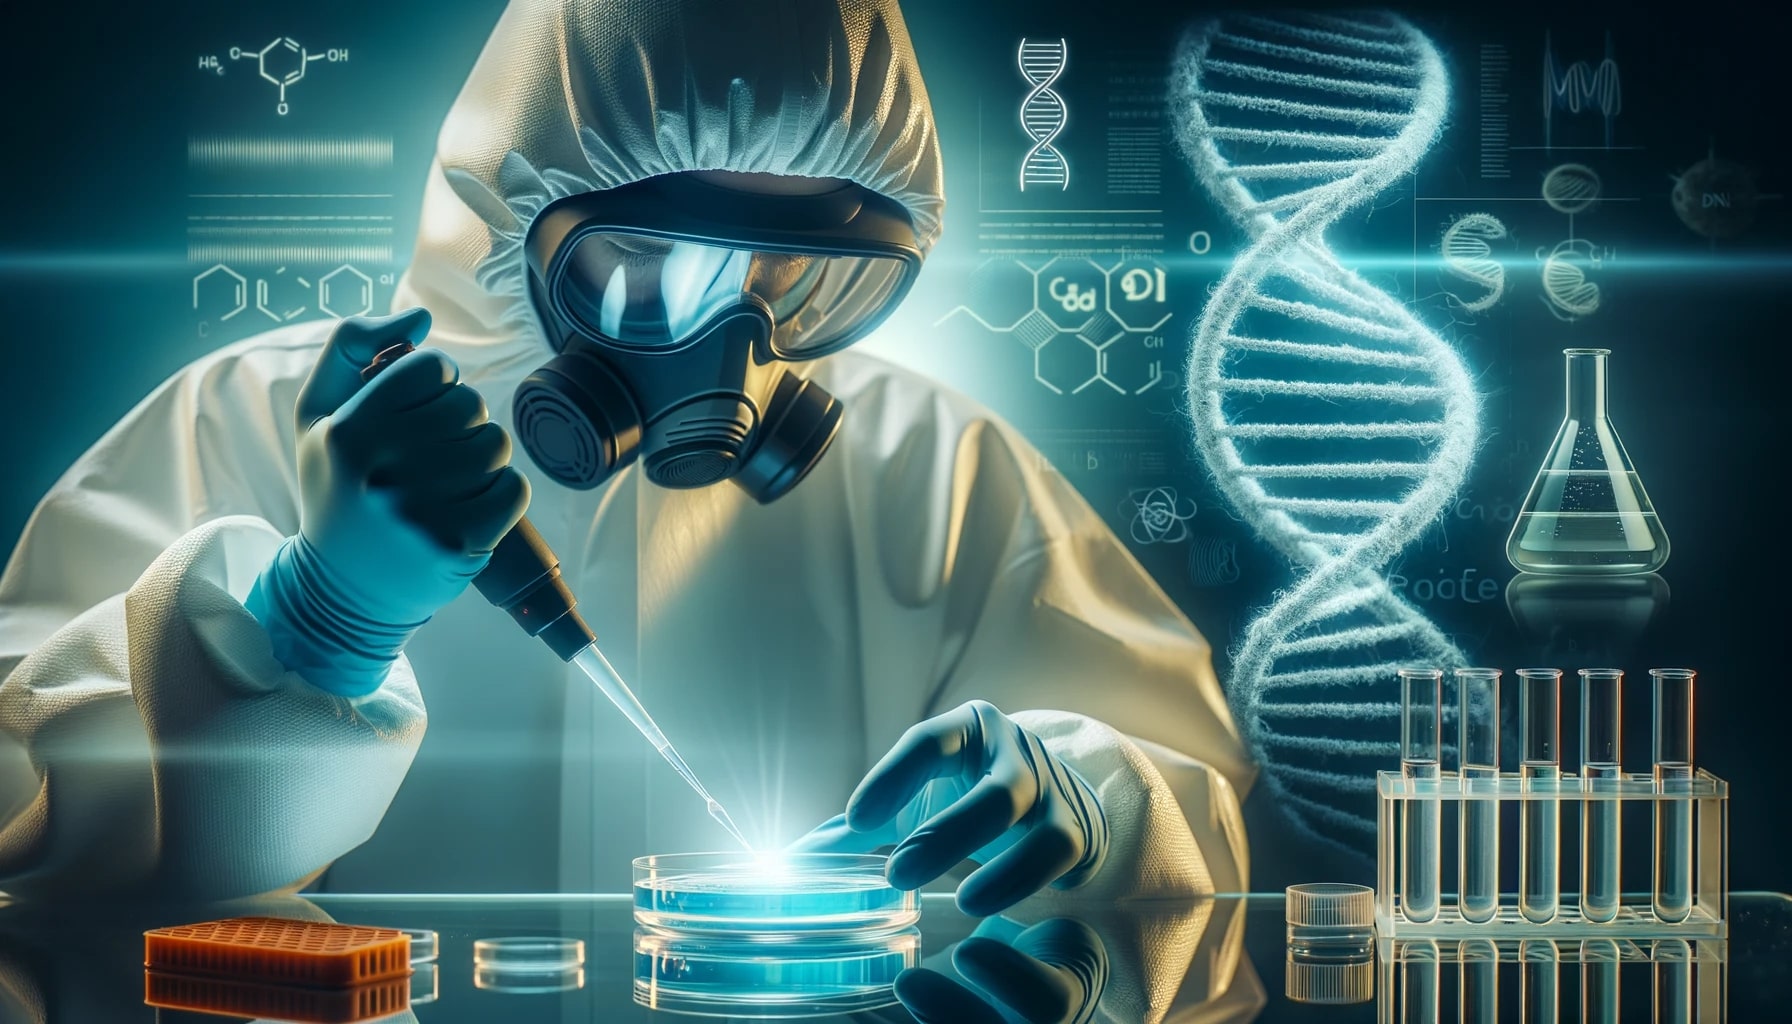 A scientist wearing protective gear, pipetting a CRISPR solution into a petri dish, with a DNA helix hologram being projected beside them.